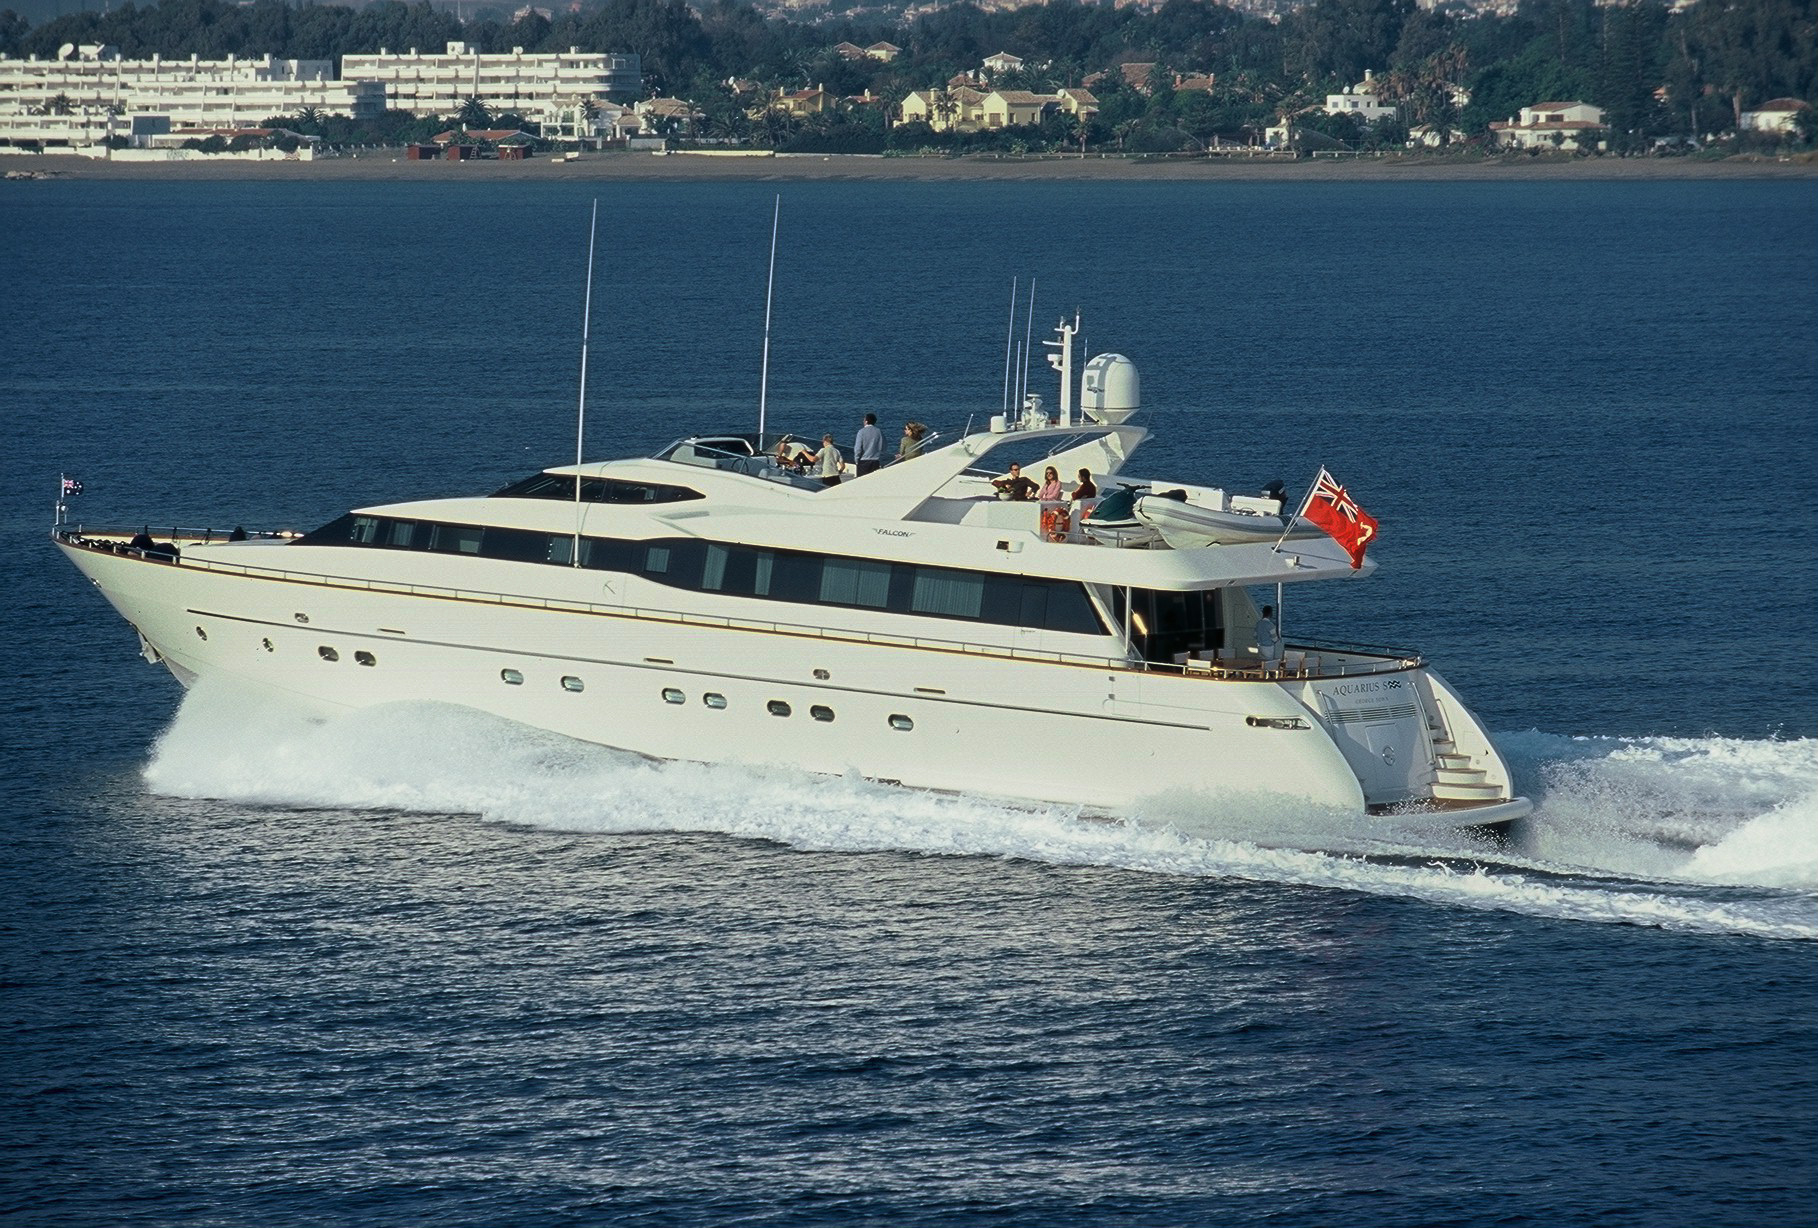 Aquarius S charter specs and number of guests